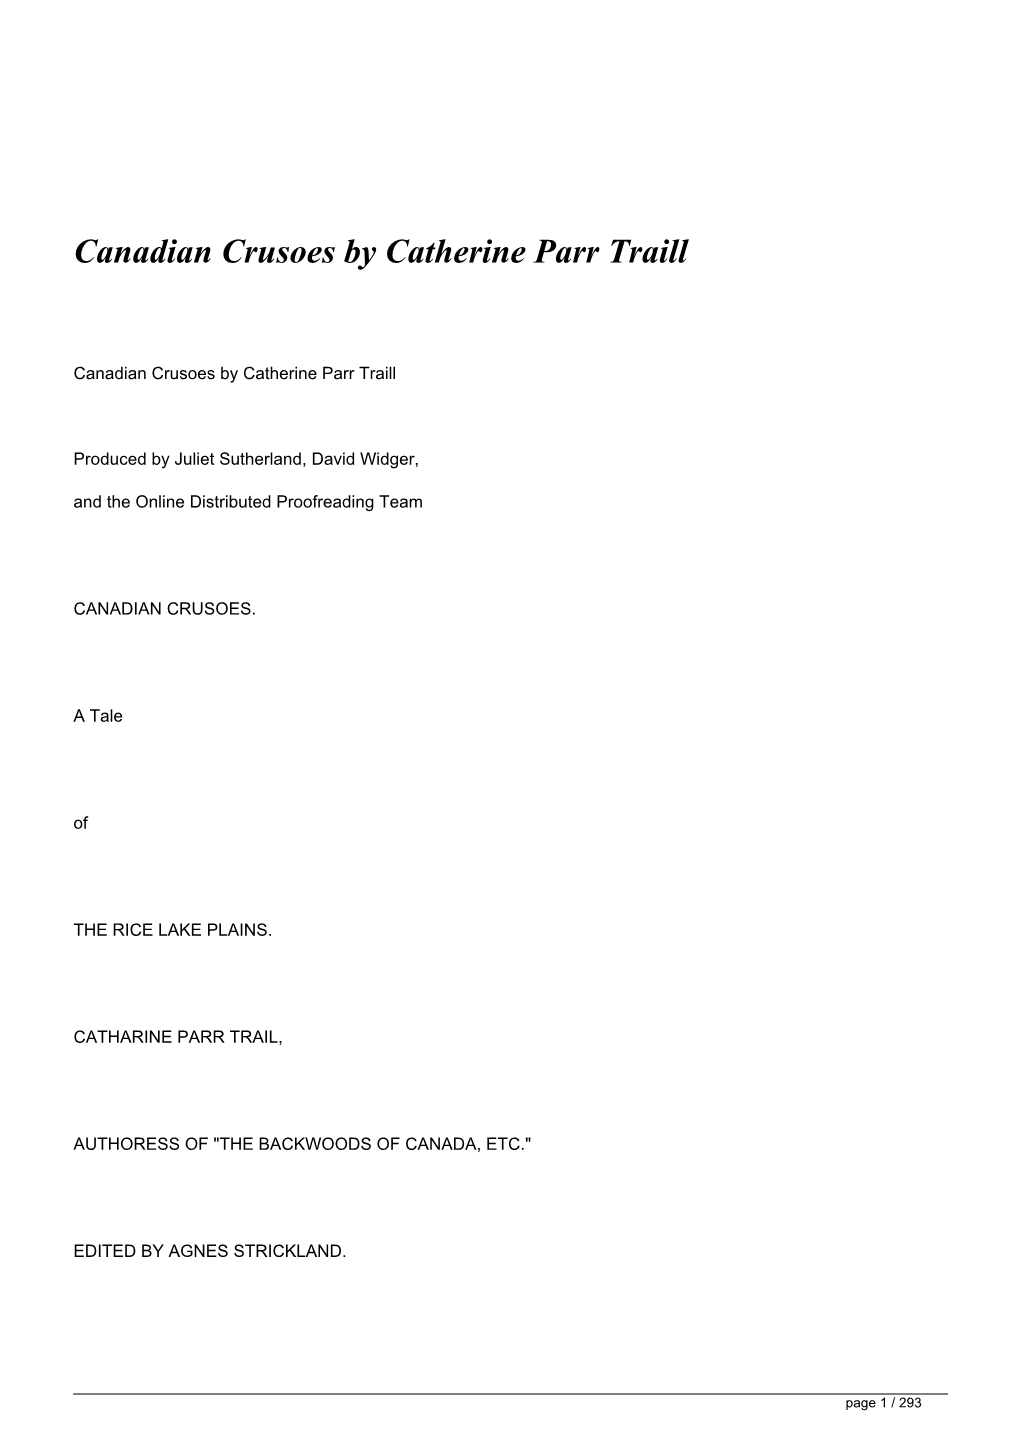 Canadian Crusoes by Catherine Parr Traill&lt;/H1&gt;